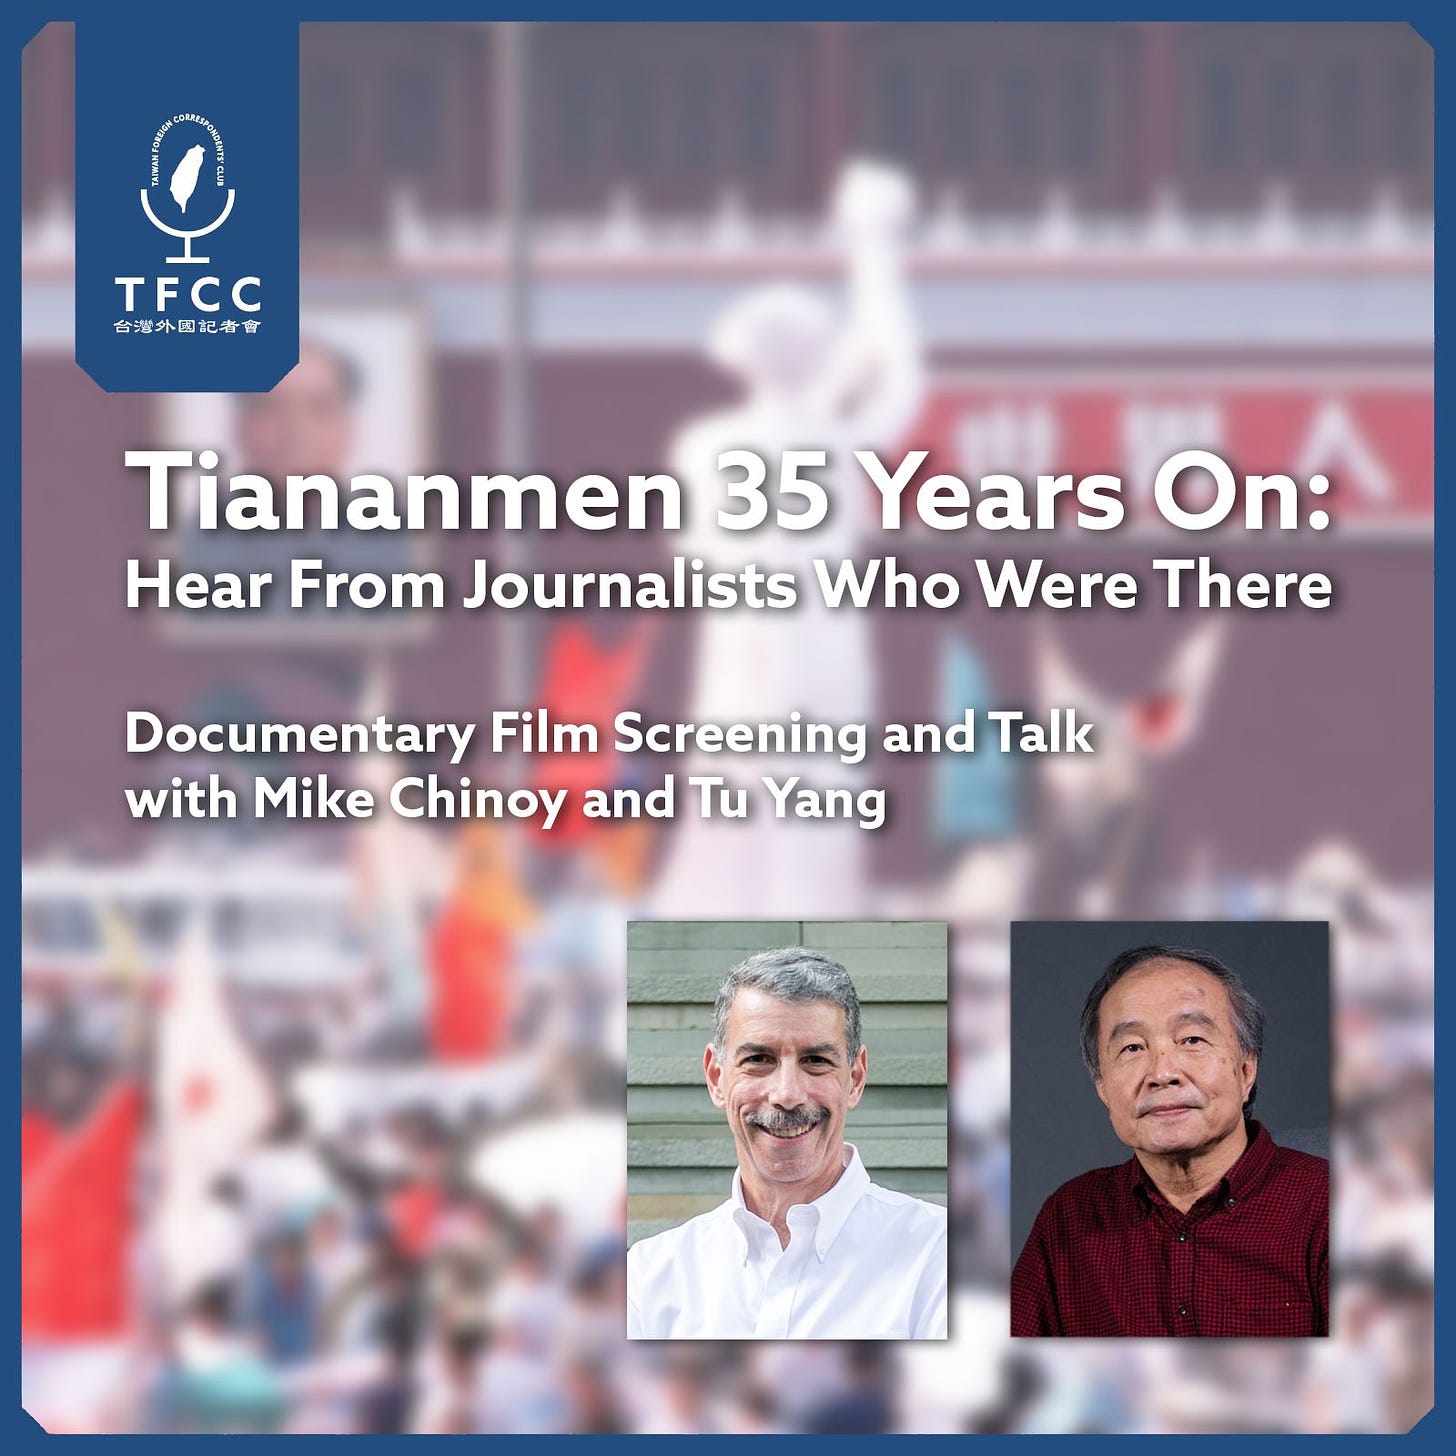 May be an image of 2 people and text that says 'TFCC 台强外國紀者會 물 古强外器 Tiananmen 35 Years On: Hear From Journalists Who Were There Documentary Film Screening and Talk with Mike Chinoy and Tu Yang'